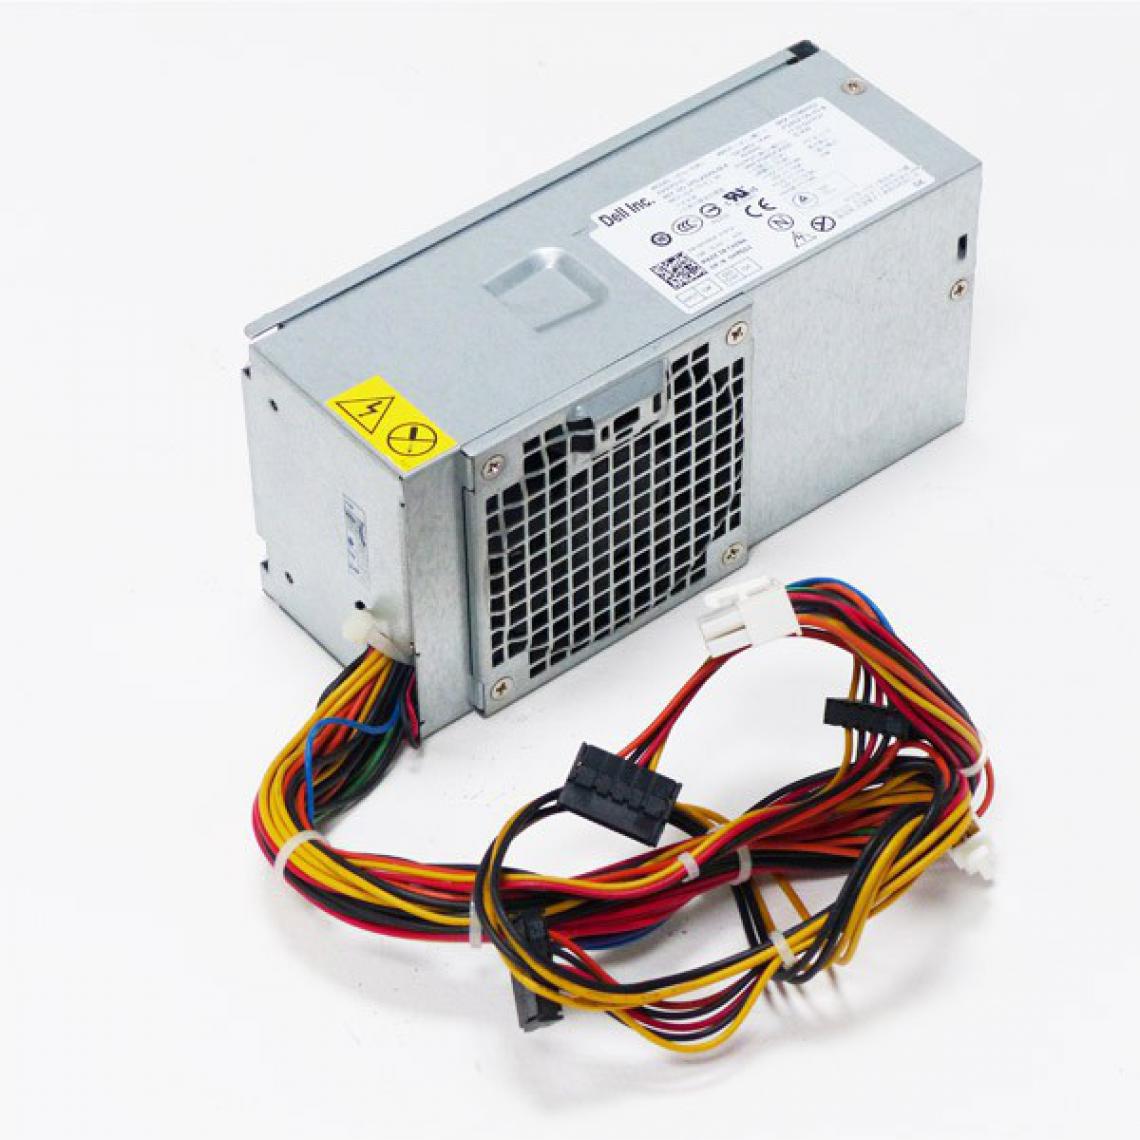 Dell - Alimentation DELL H250AD-00 250W Optiplex 390 DT Power Supply - Alimentation modulaire